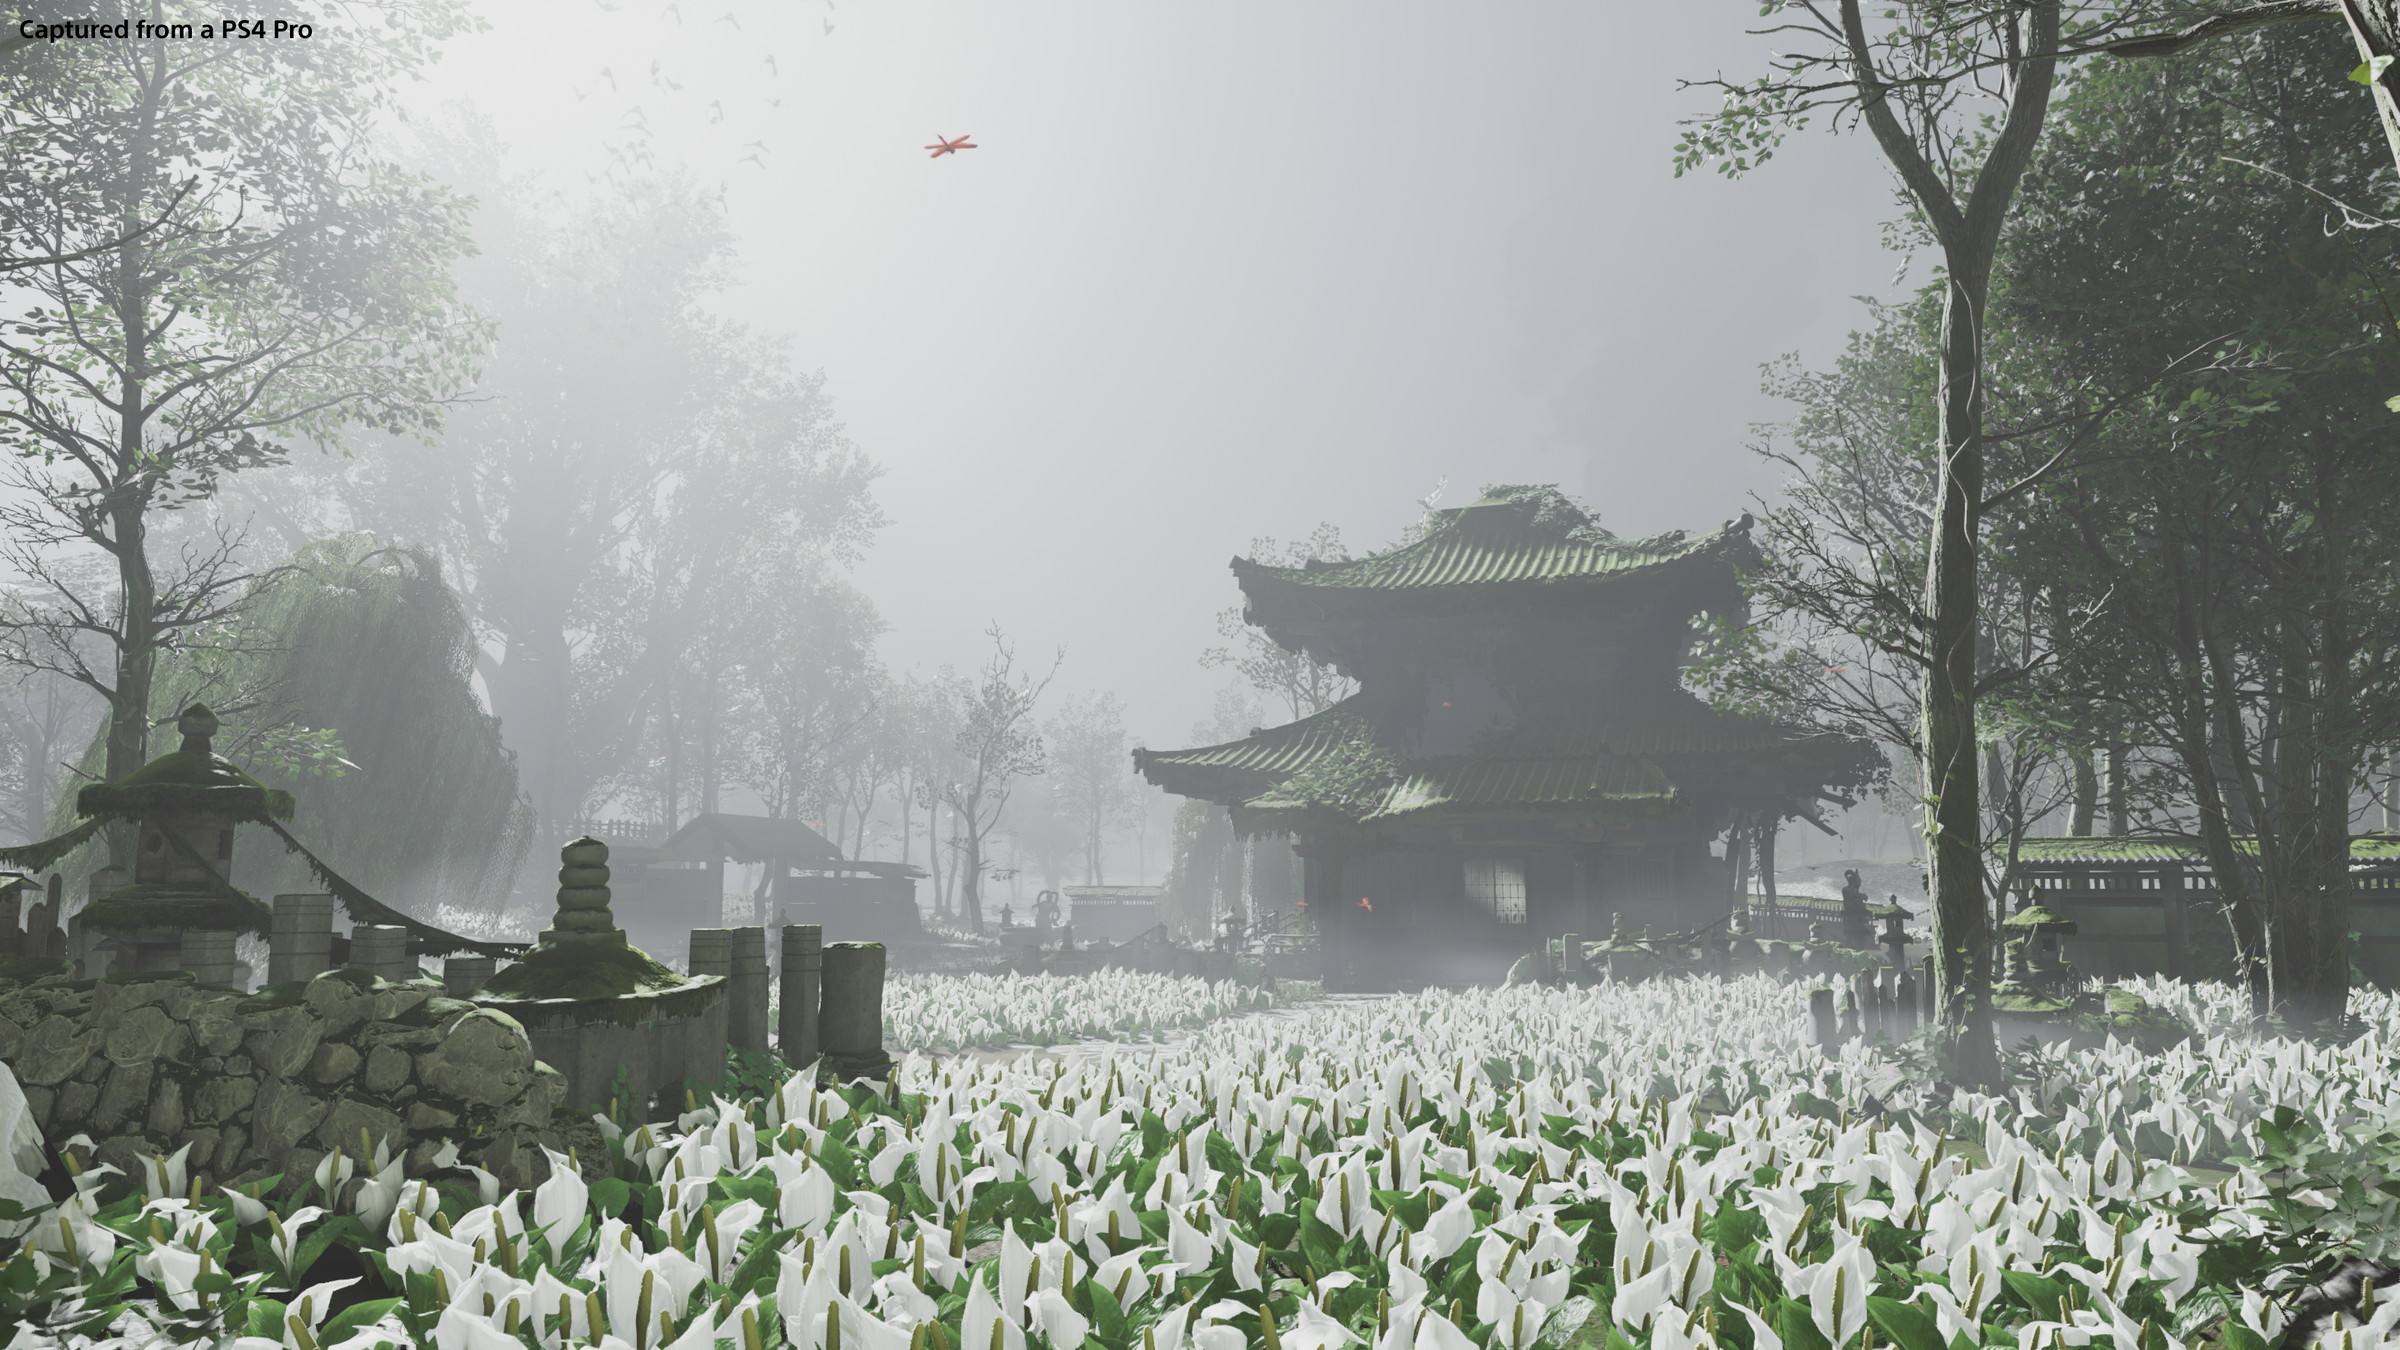 The landscapes in Ghost of Tsushima are serene